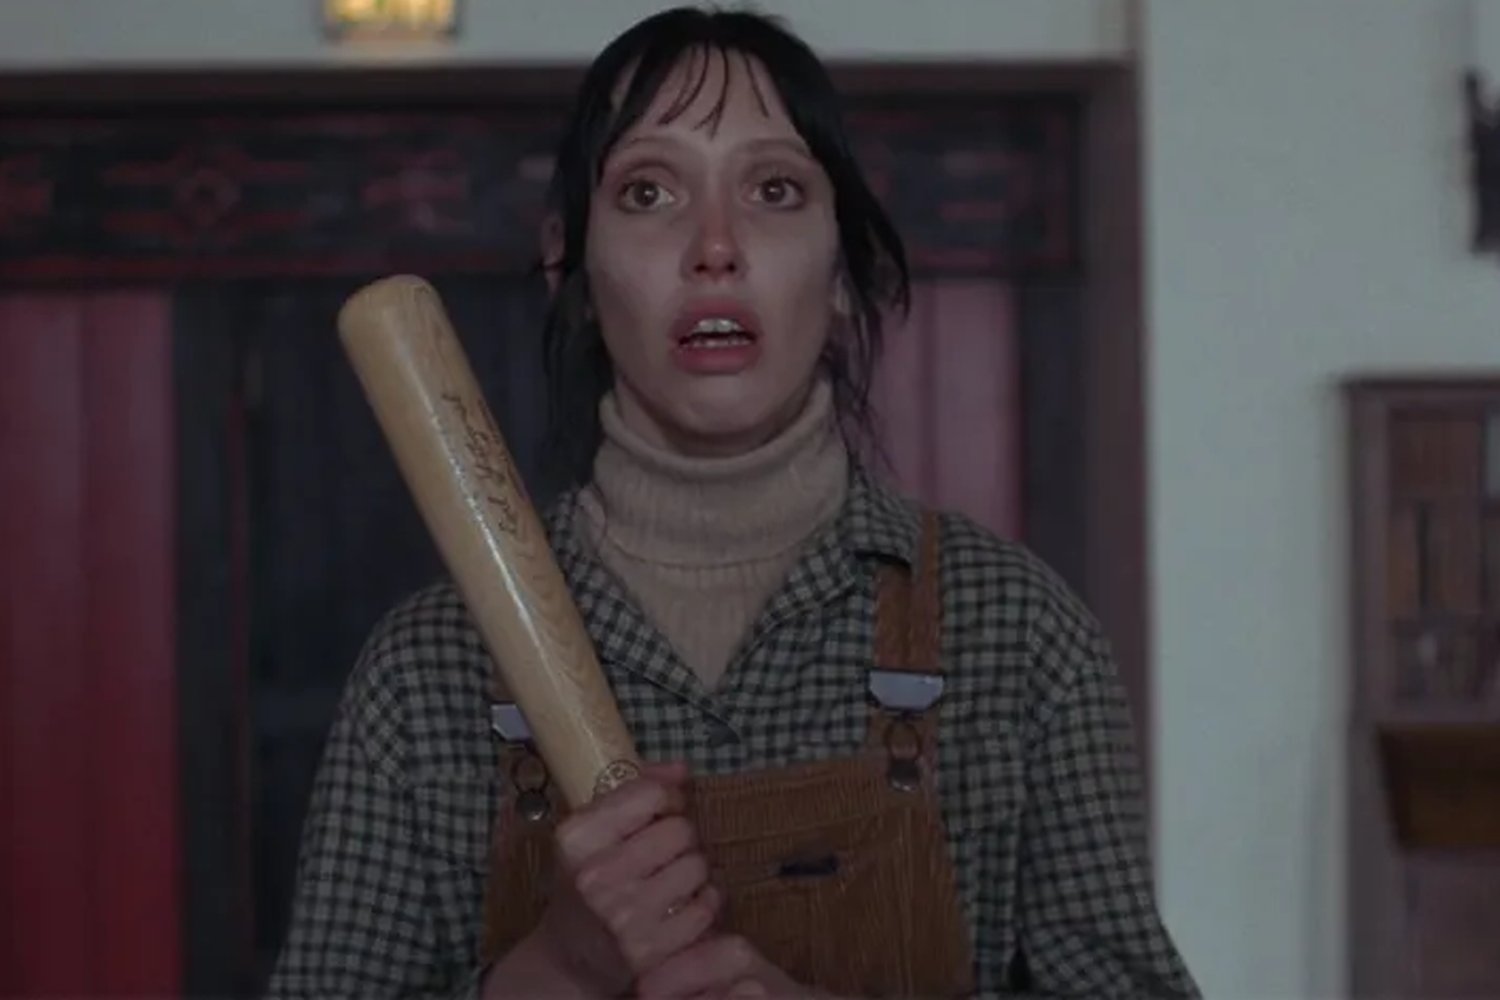 Shelley Duvall, The Shining‘s Legendary Scream Queen, Has Died